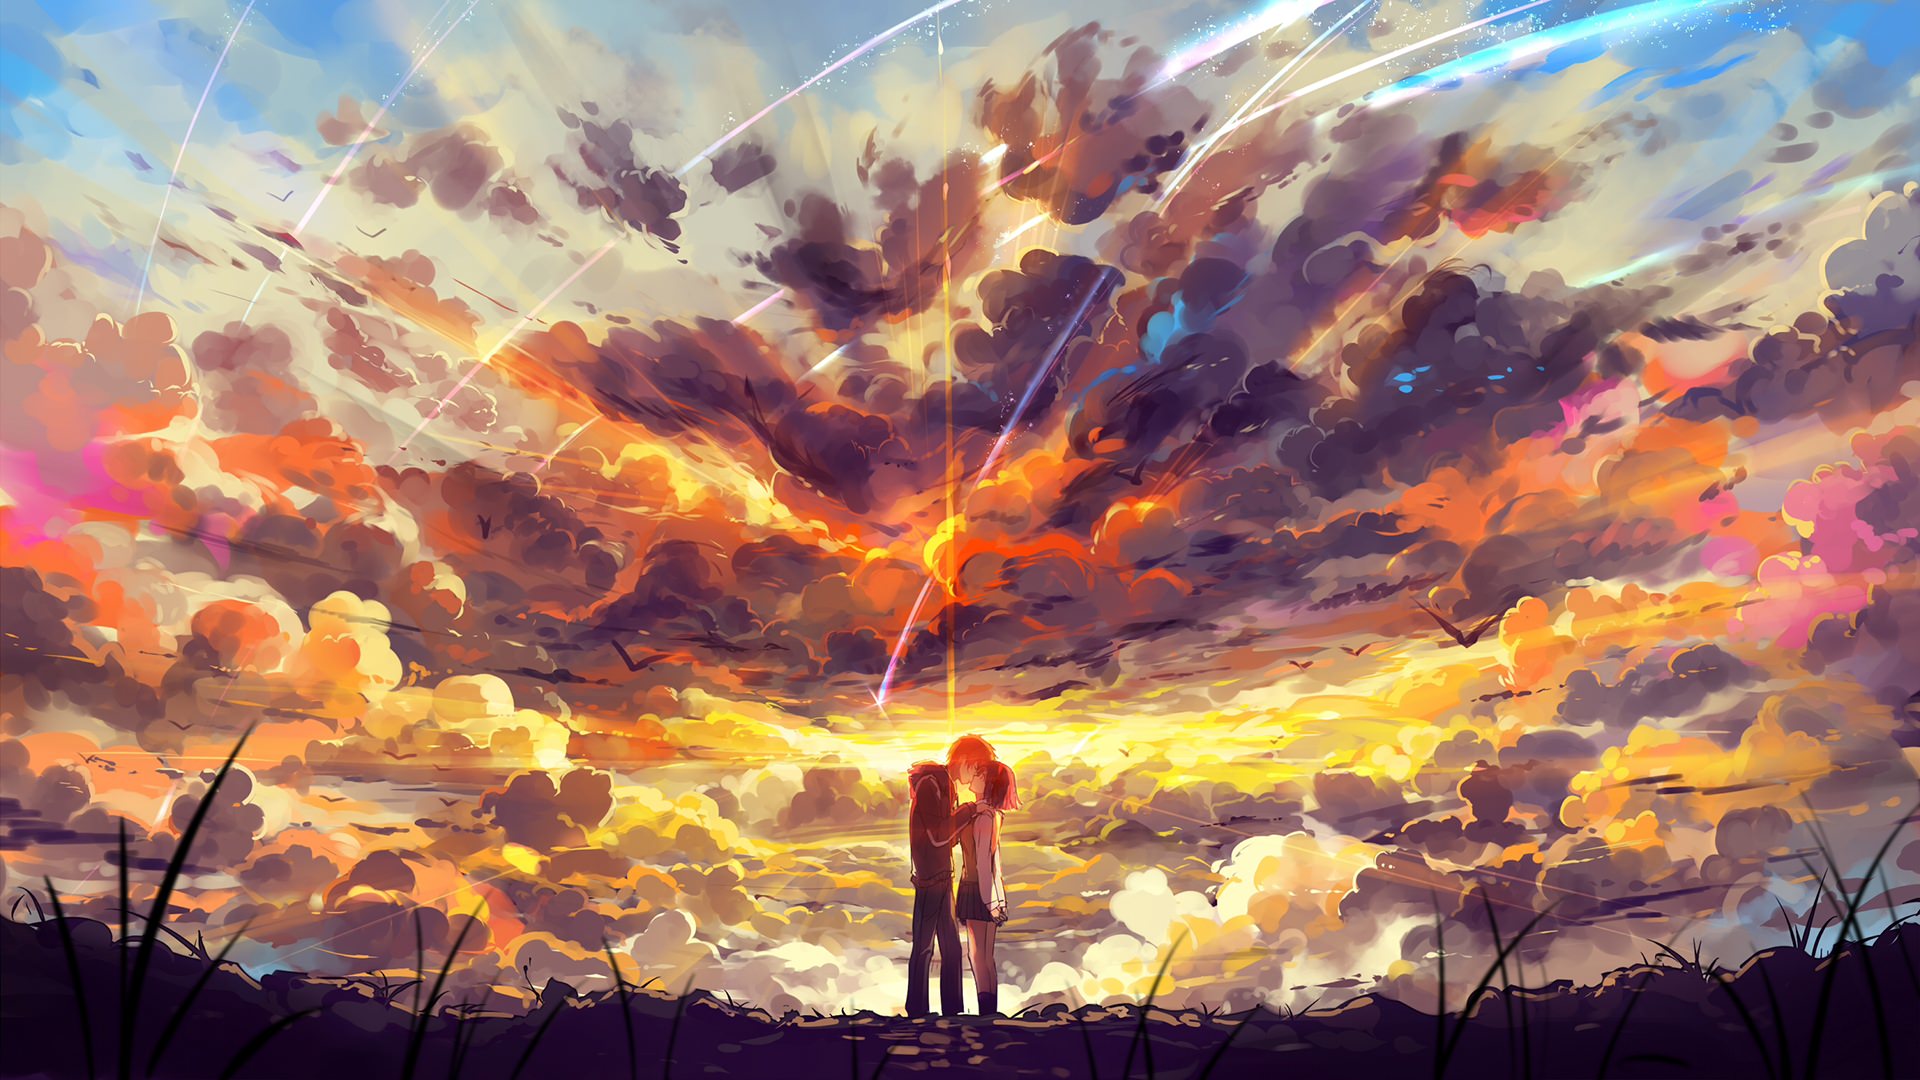 Your Name - Your Name Wallpaper Hd Pc - HD Wallpaper 